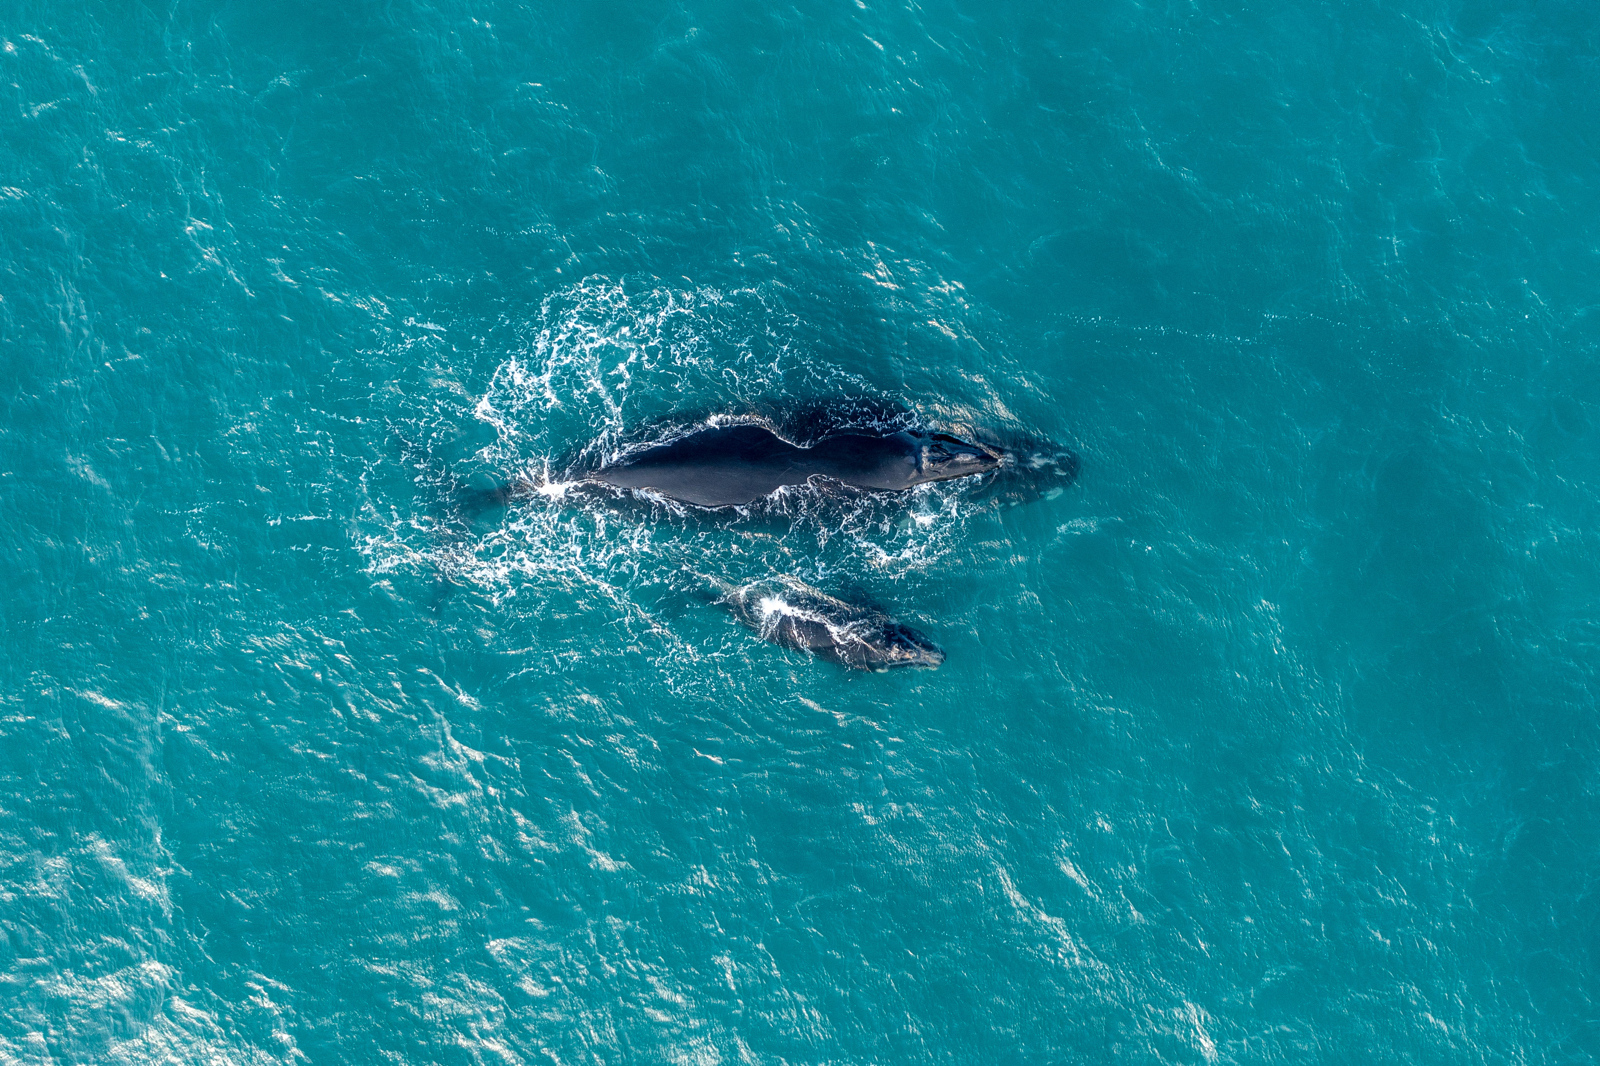 Best spots to whale watch in SA | WE ARE.SA